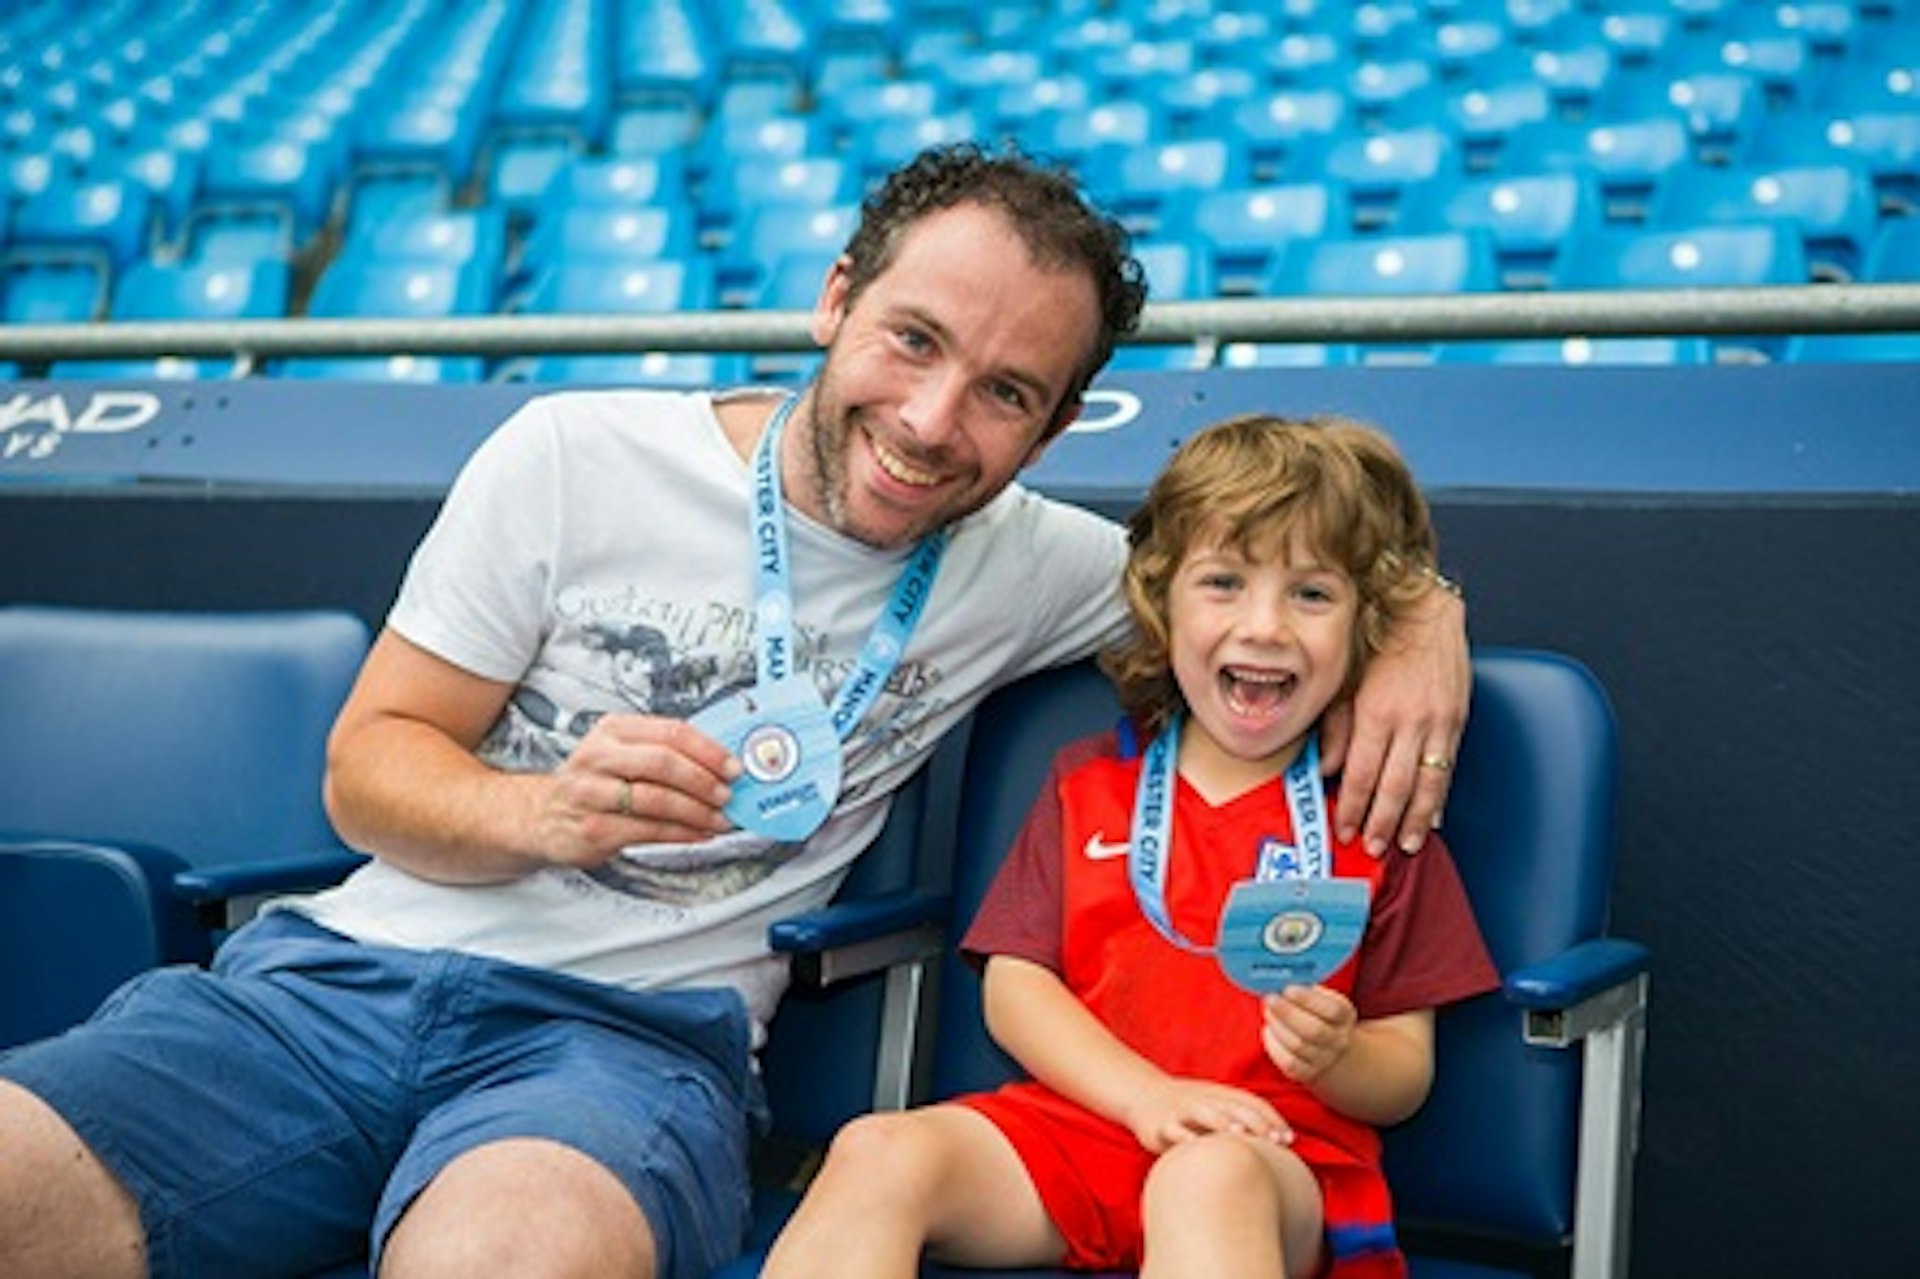 Manchester City Football Club Stadium Tour for One Child 3